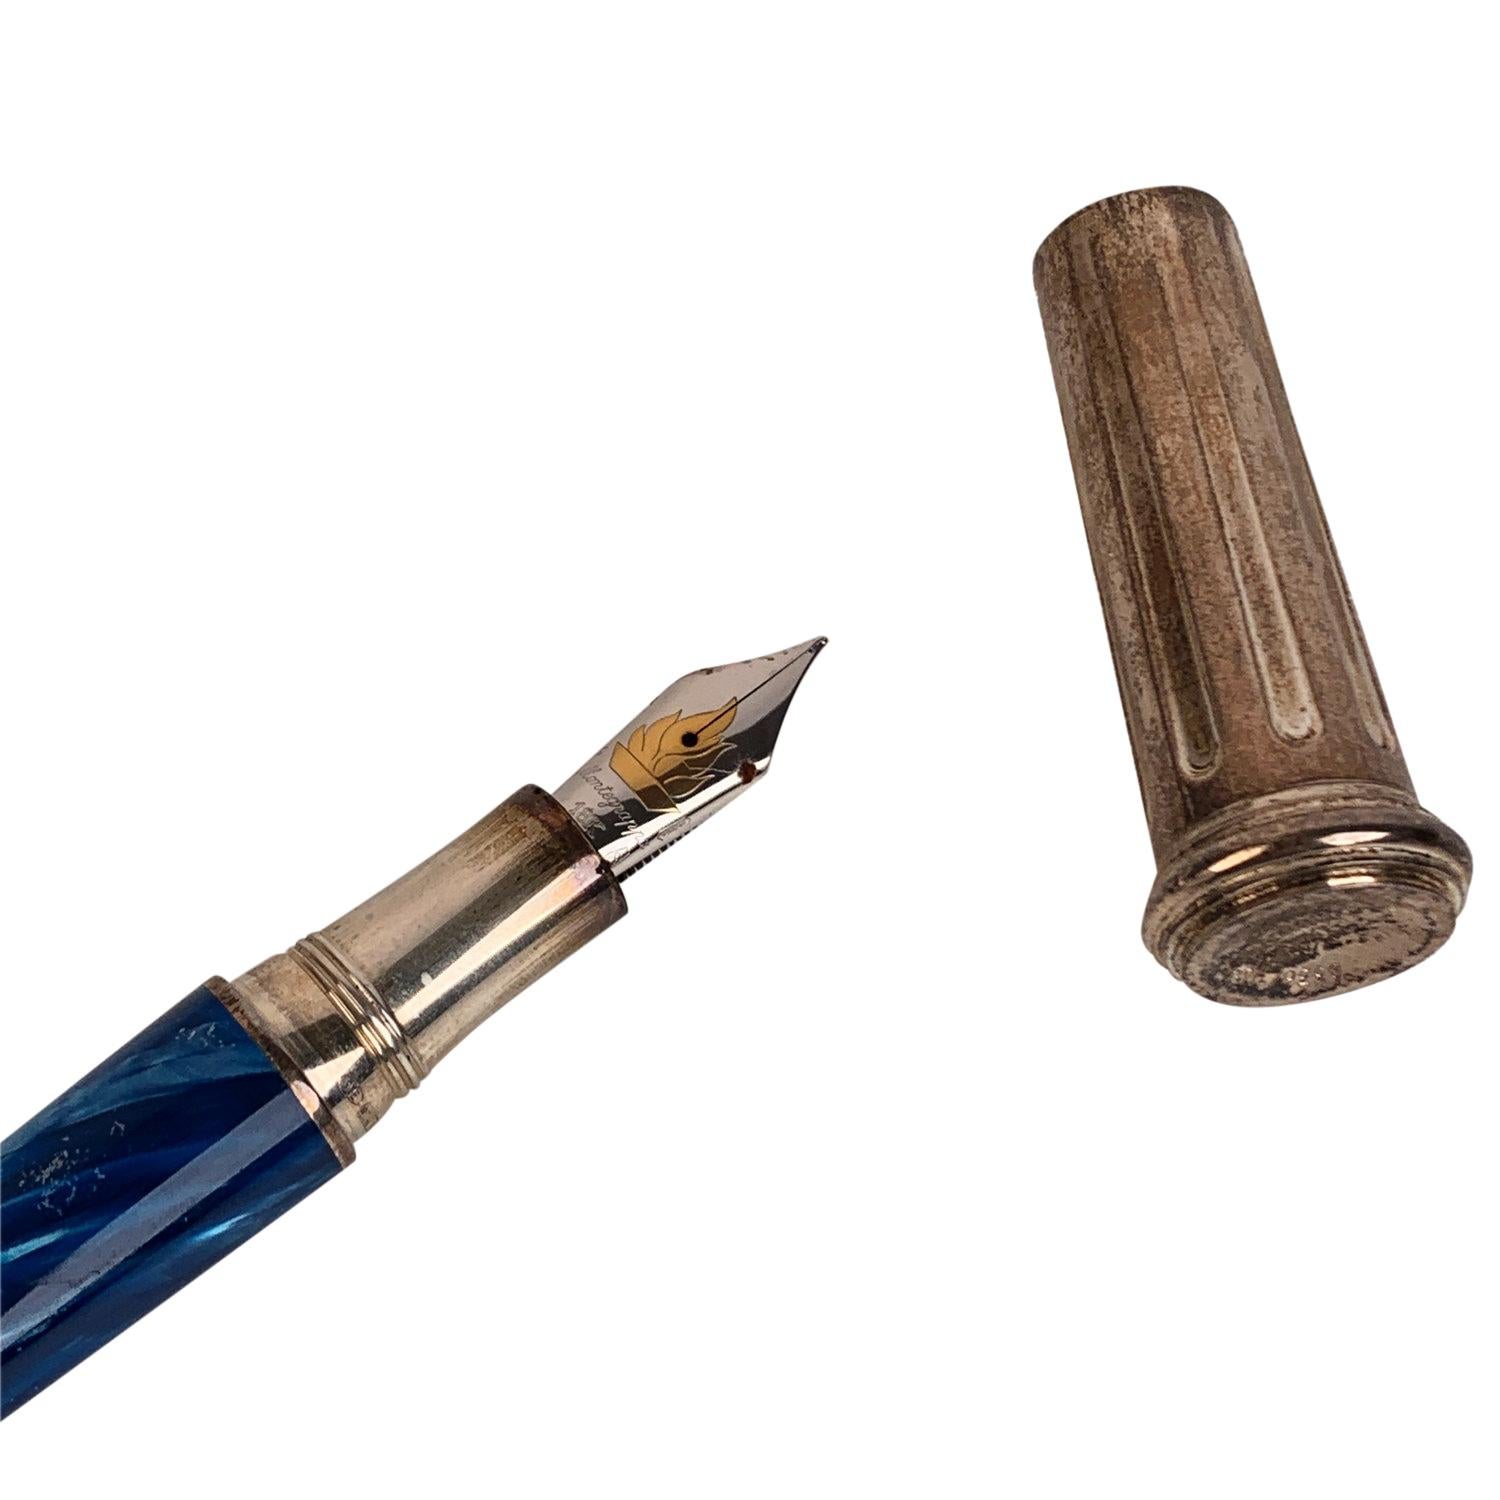 - Montegrappa pays tribute to Greece with this stunning numbered limited edition fountain pen
- Turquoise barrel of finest celluloid 
- 925 Sterling Silver cap
- The cap of the pen recalls the form of the Olympic torch and the tapered lines of Greek